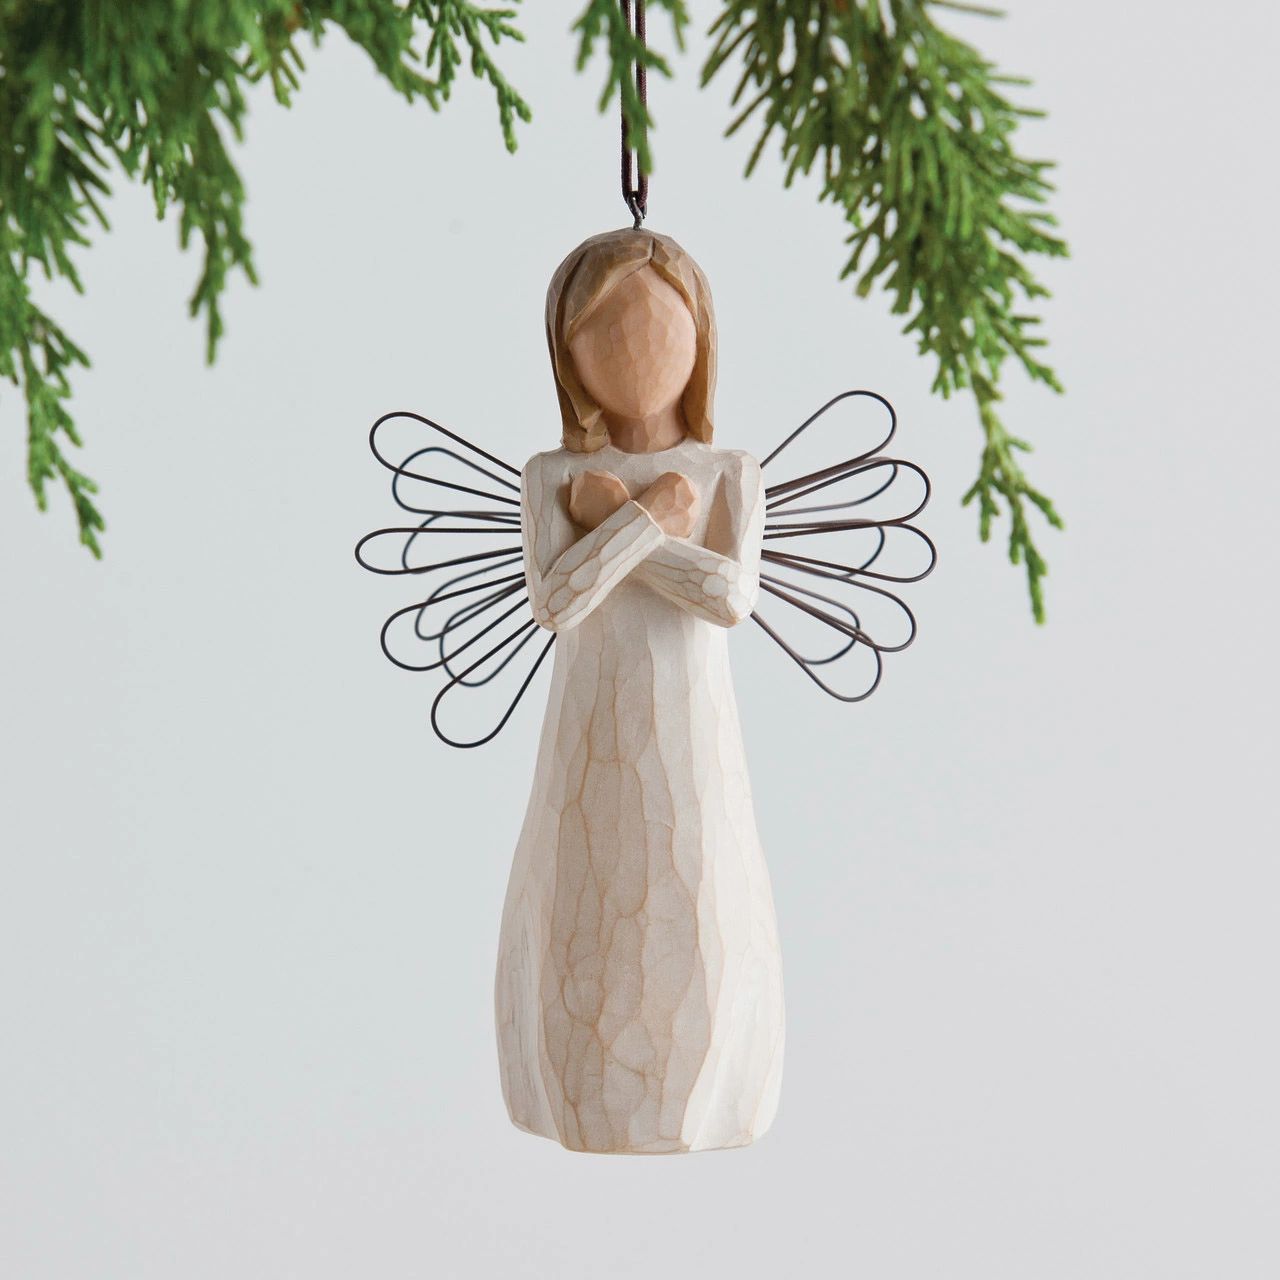 Willow Tree: Sign for Love Ornament